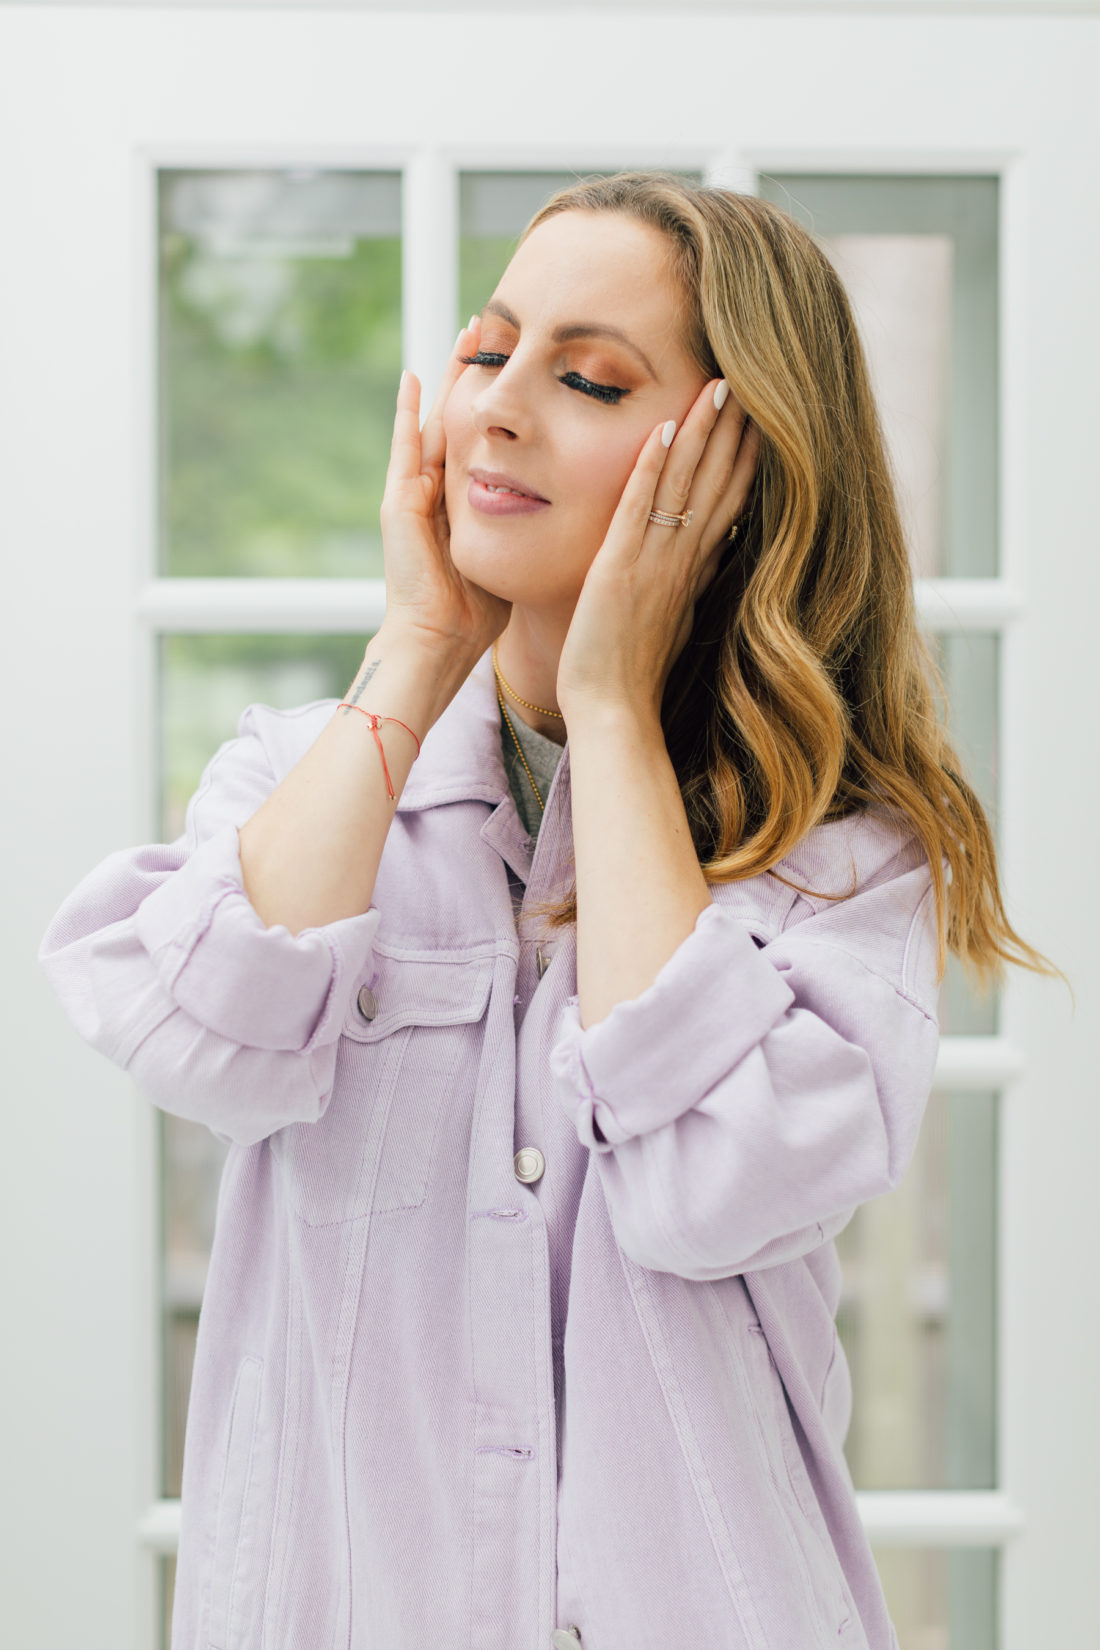 Eva Amurri Martino shares her September 2019 Obsessions which includes this Mario Badescu Rose Hips Nourishing Oil